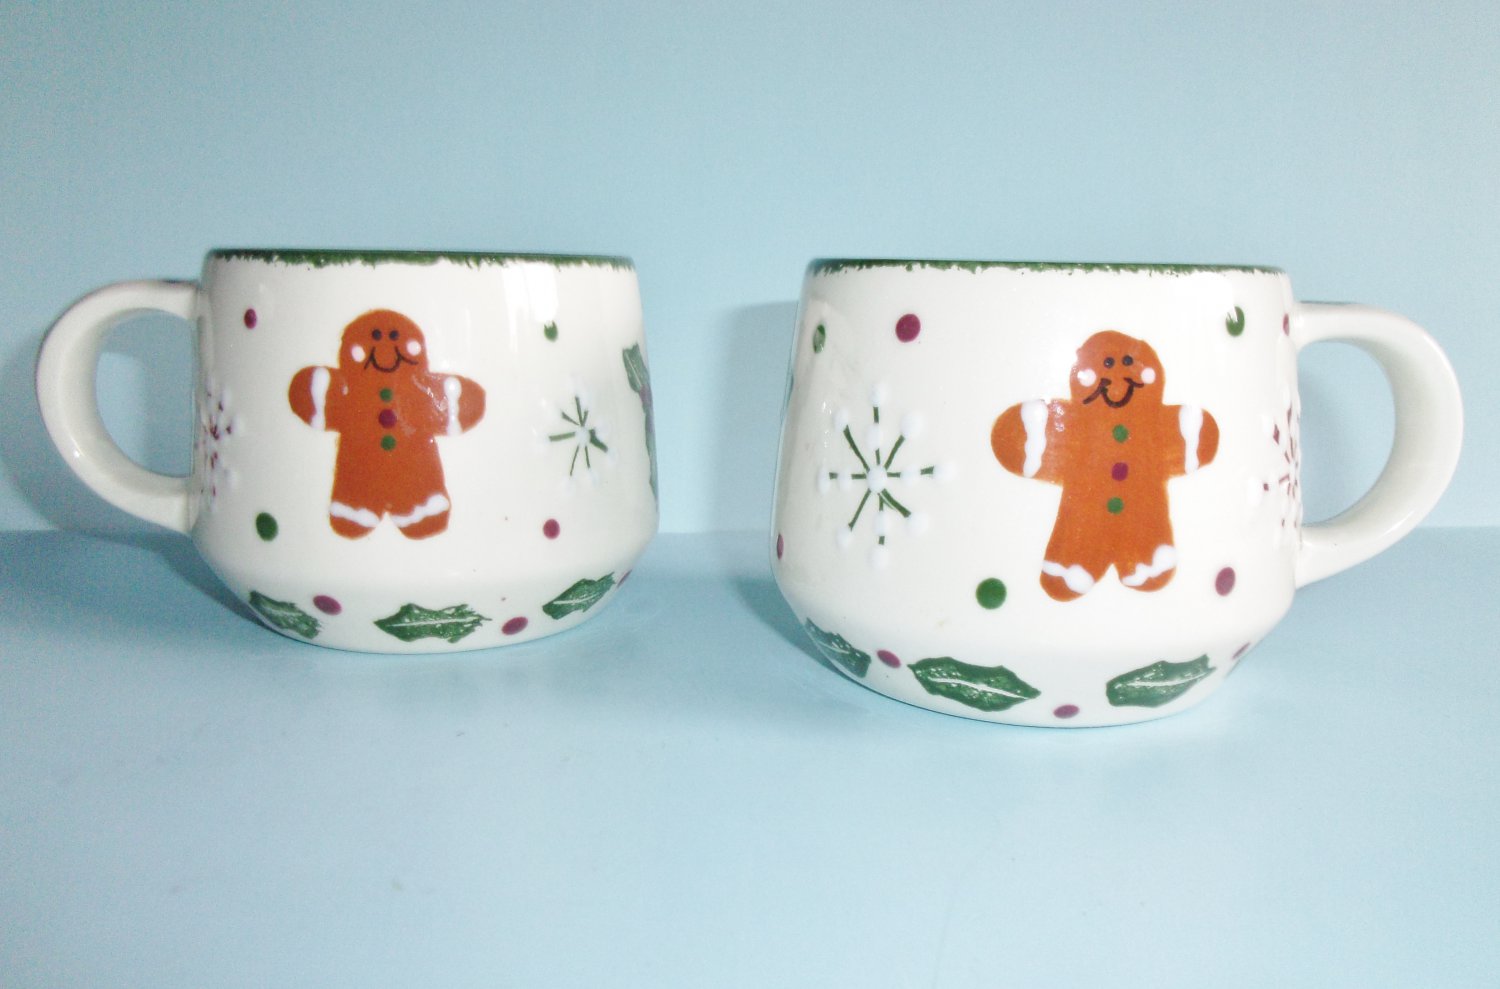 2000 Frankoma Gingerbread Mugs With Holly Hand Painted Pair of Holiday Mugs